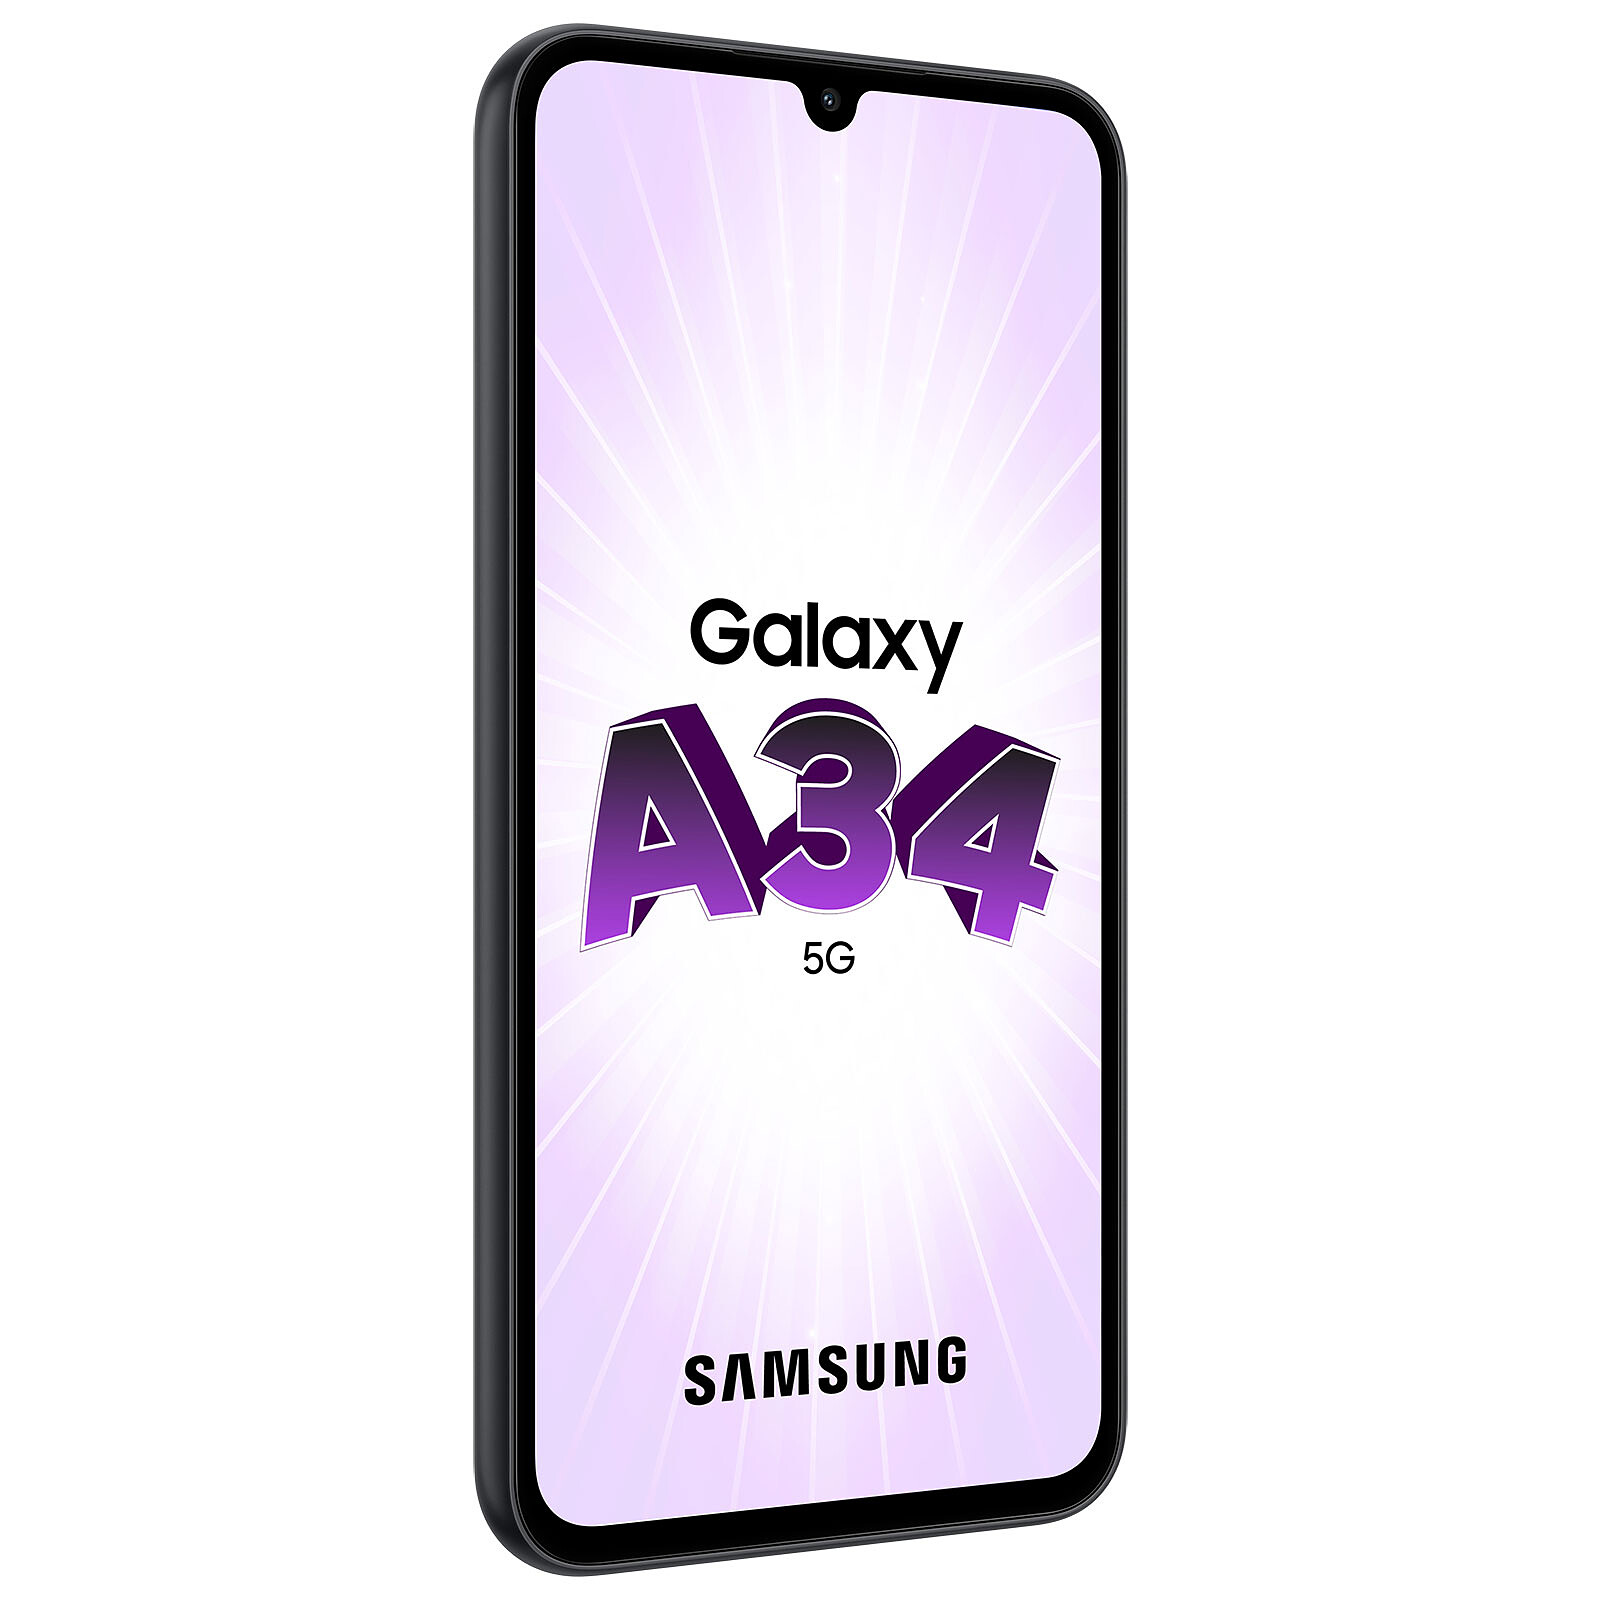 Samsung Galaxy A34 5G Specs (Graphite, 128GB) Features